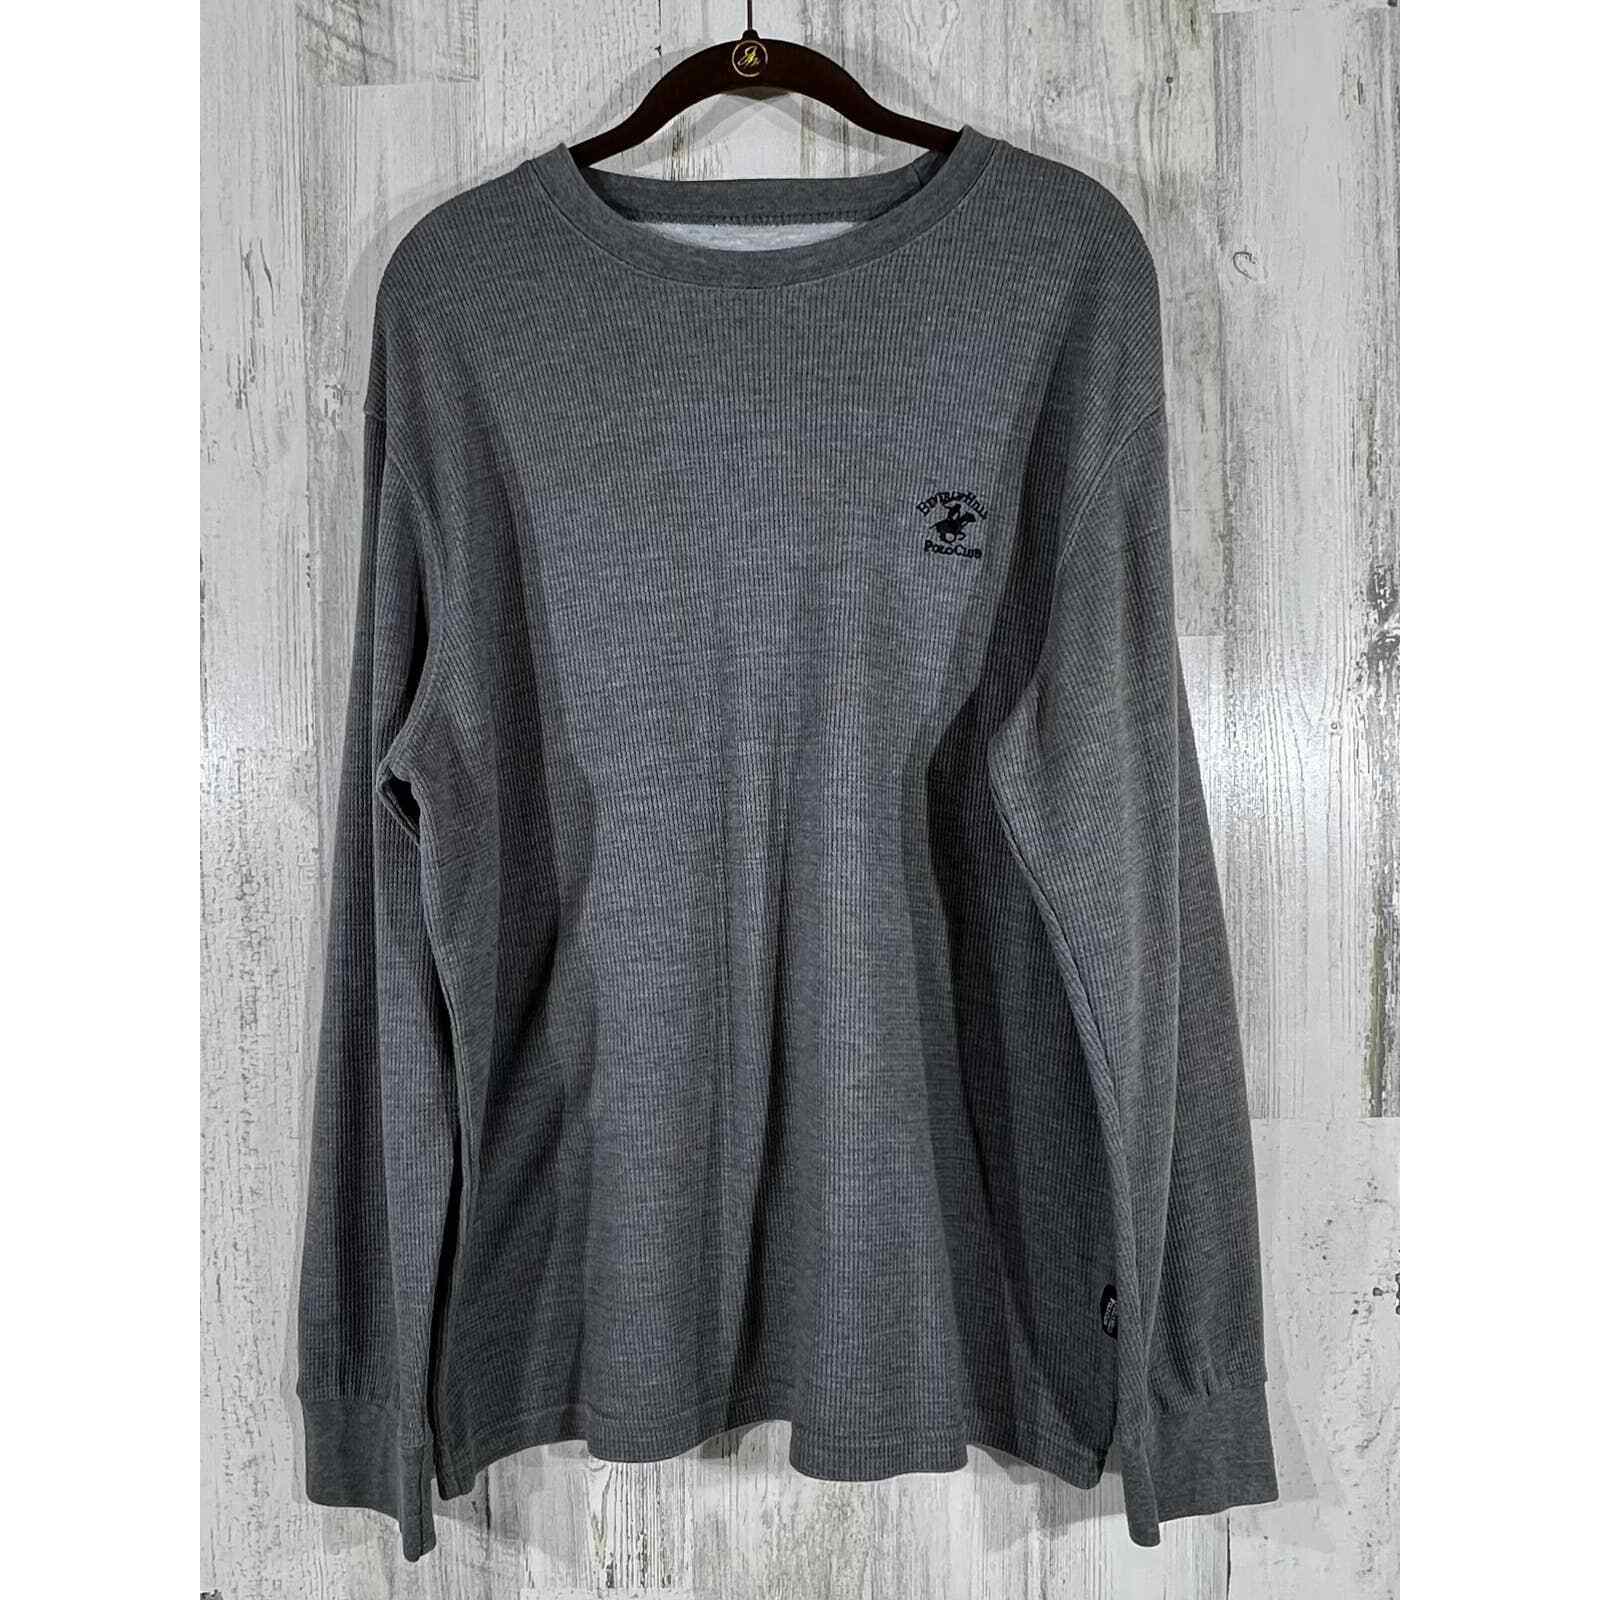 Beverly Hills Polo Club Mens Waffle Knit Shirt Gray Size Large - $14.79